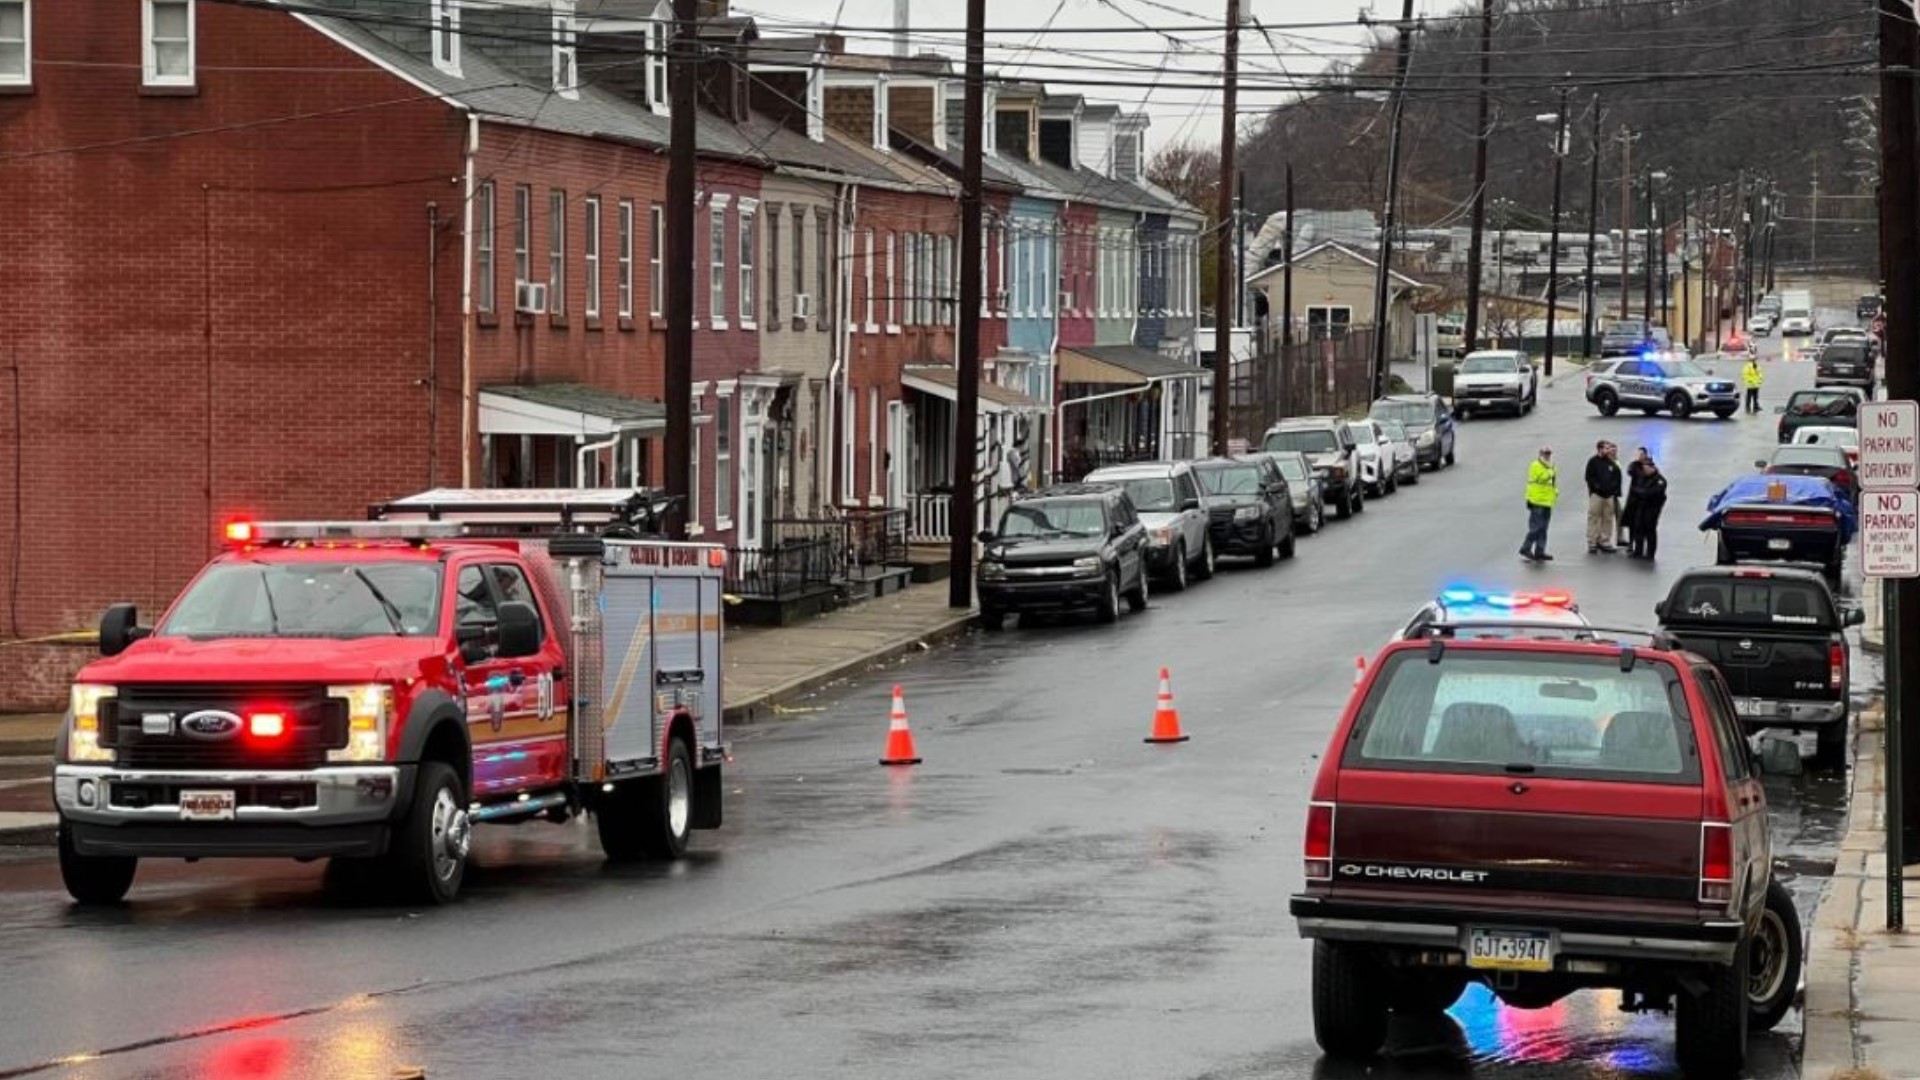 There is heavy police presence in the area of Bridge Street and North 2nd Street in the borough, and the Lancaster County Coroner has been called to the scene.